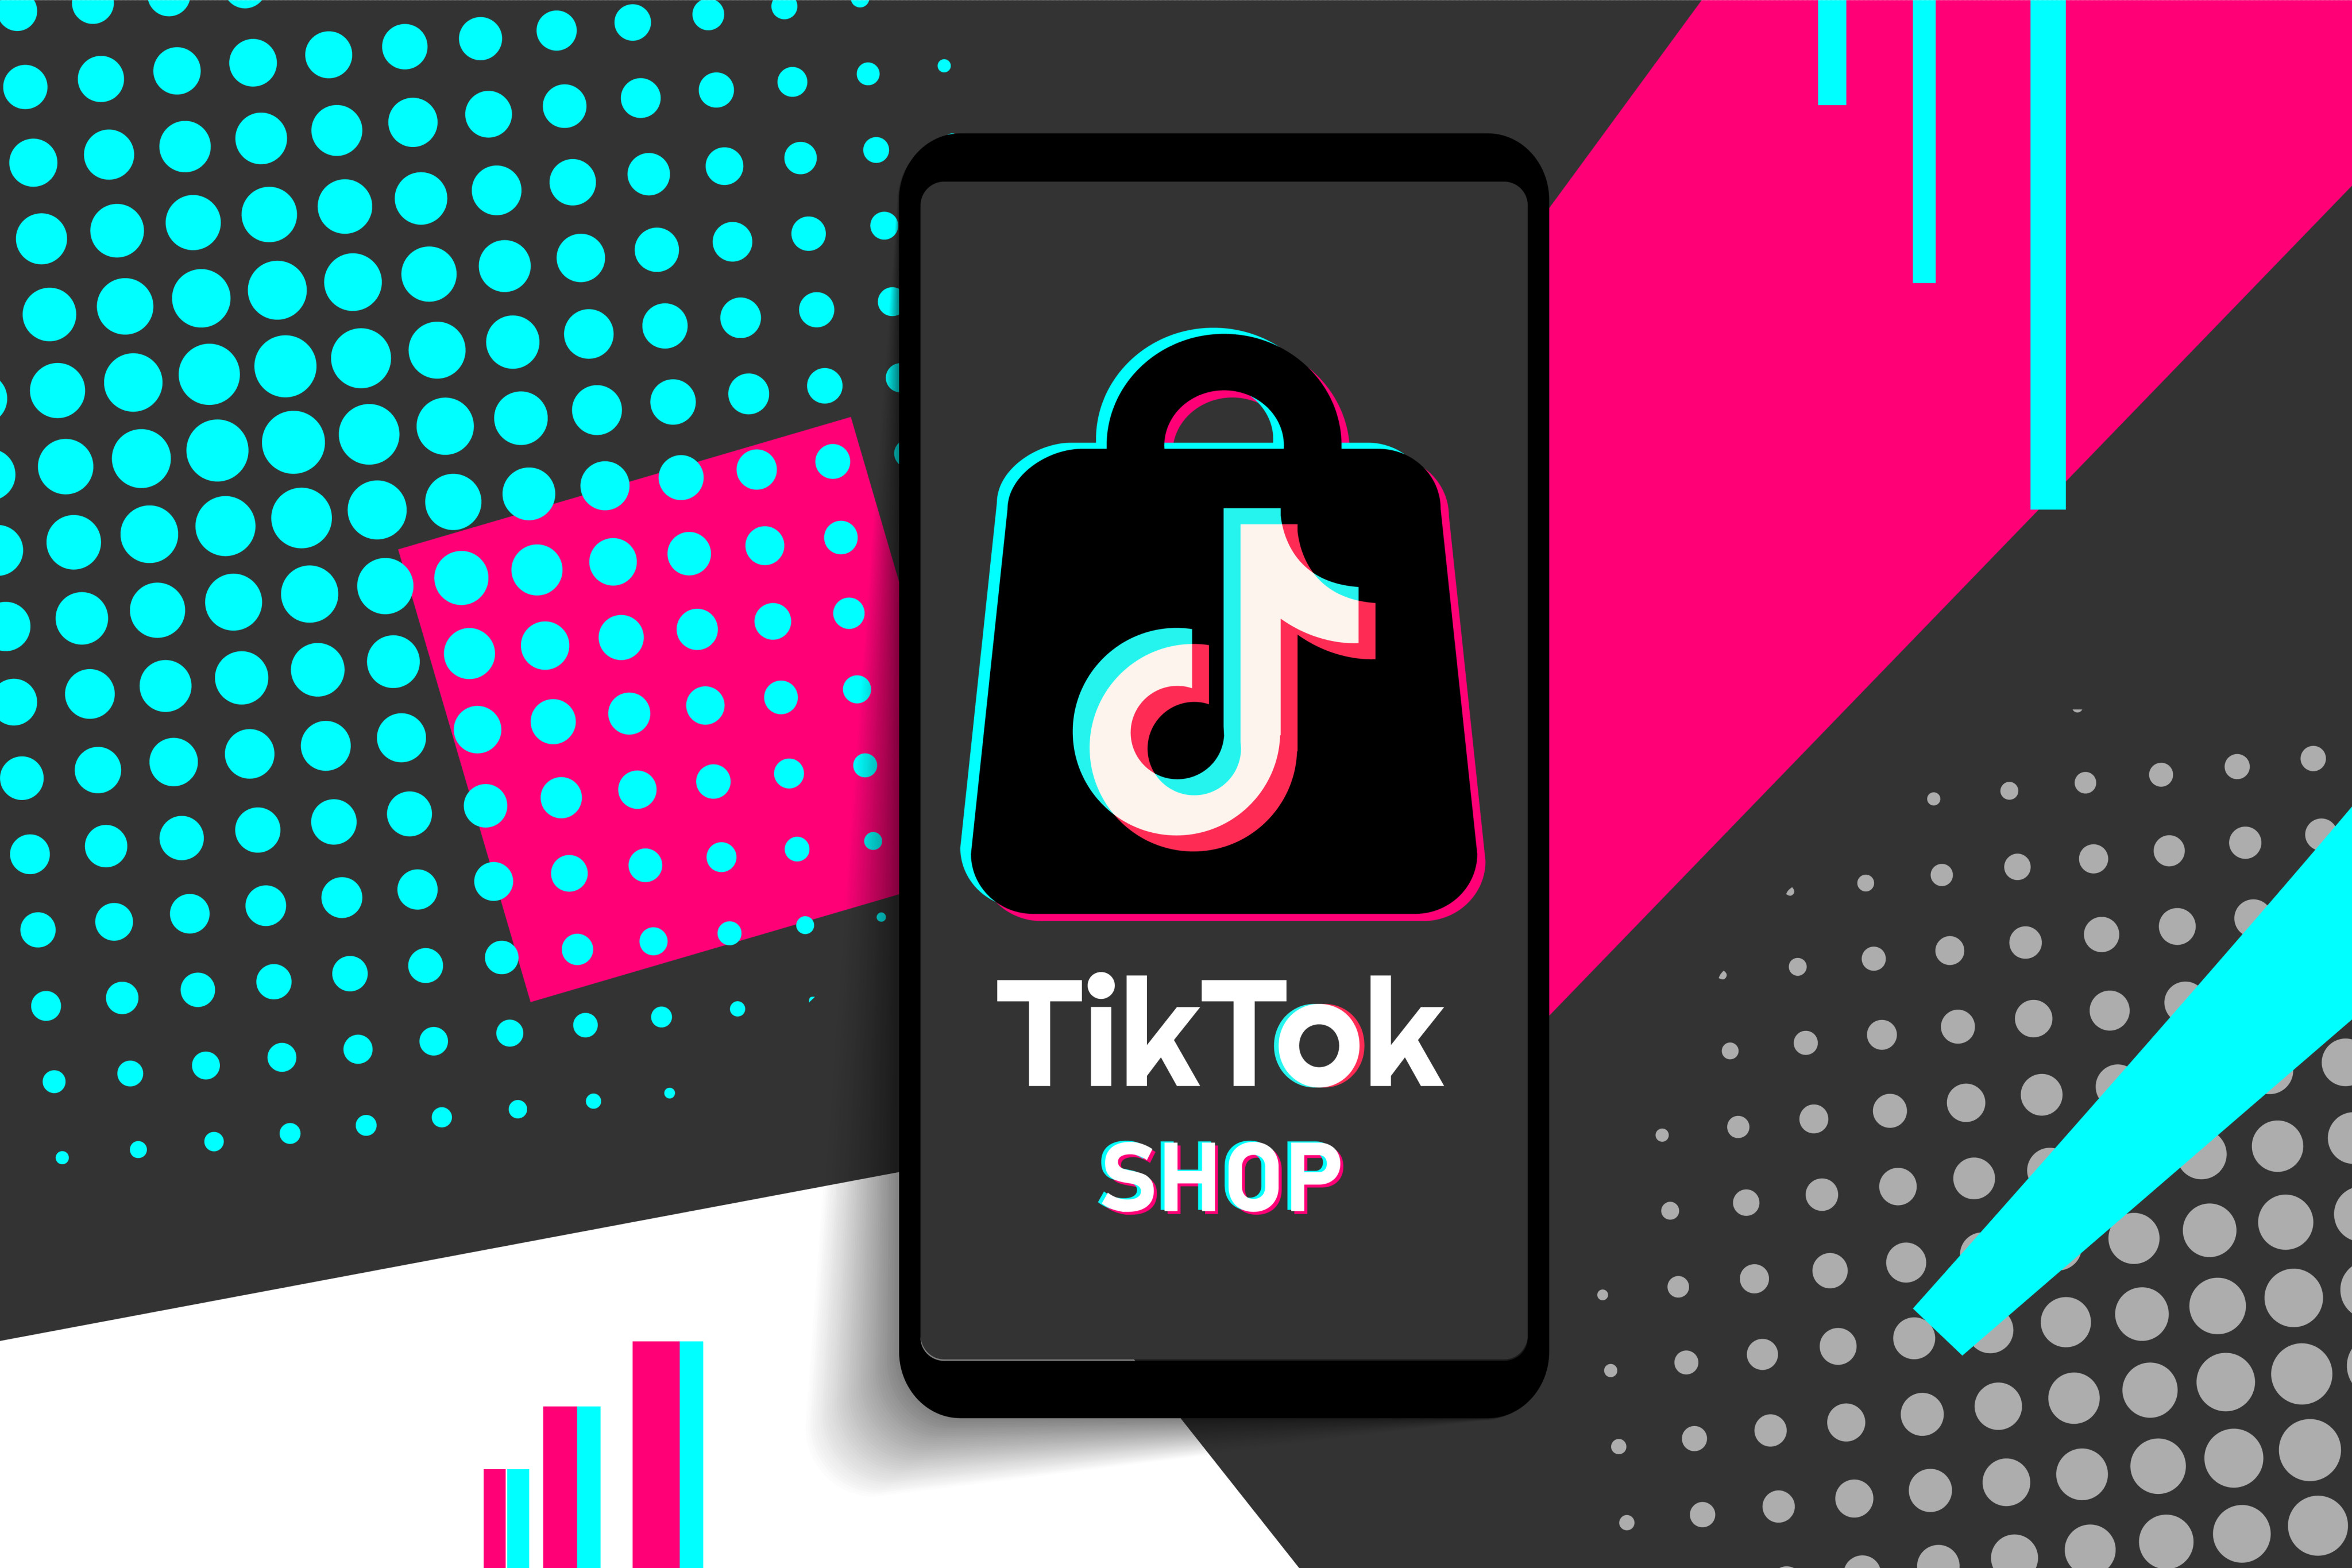 TikTok’s e-commerce debacle in Indonesia poses a challenge for the ByteDance-owned app operator’s global online retail expansion plans. Image: Shutterstock